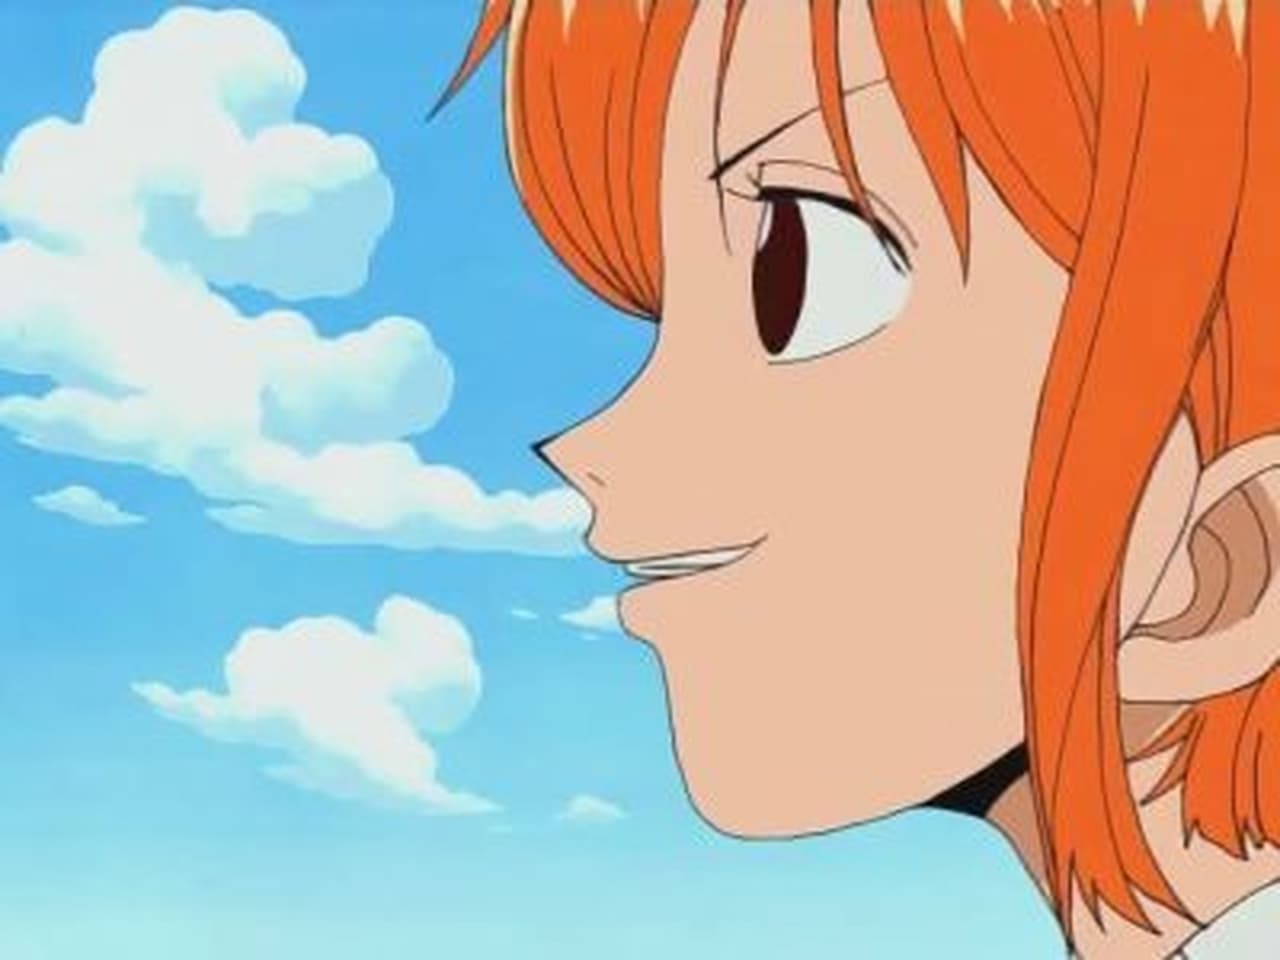 One Piece - Season 1 Episode 44 : Setting Out with a Smile! Farewell, Hometown Cocoyashi Village!